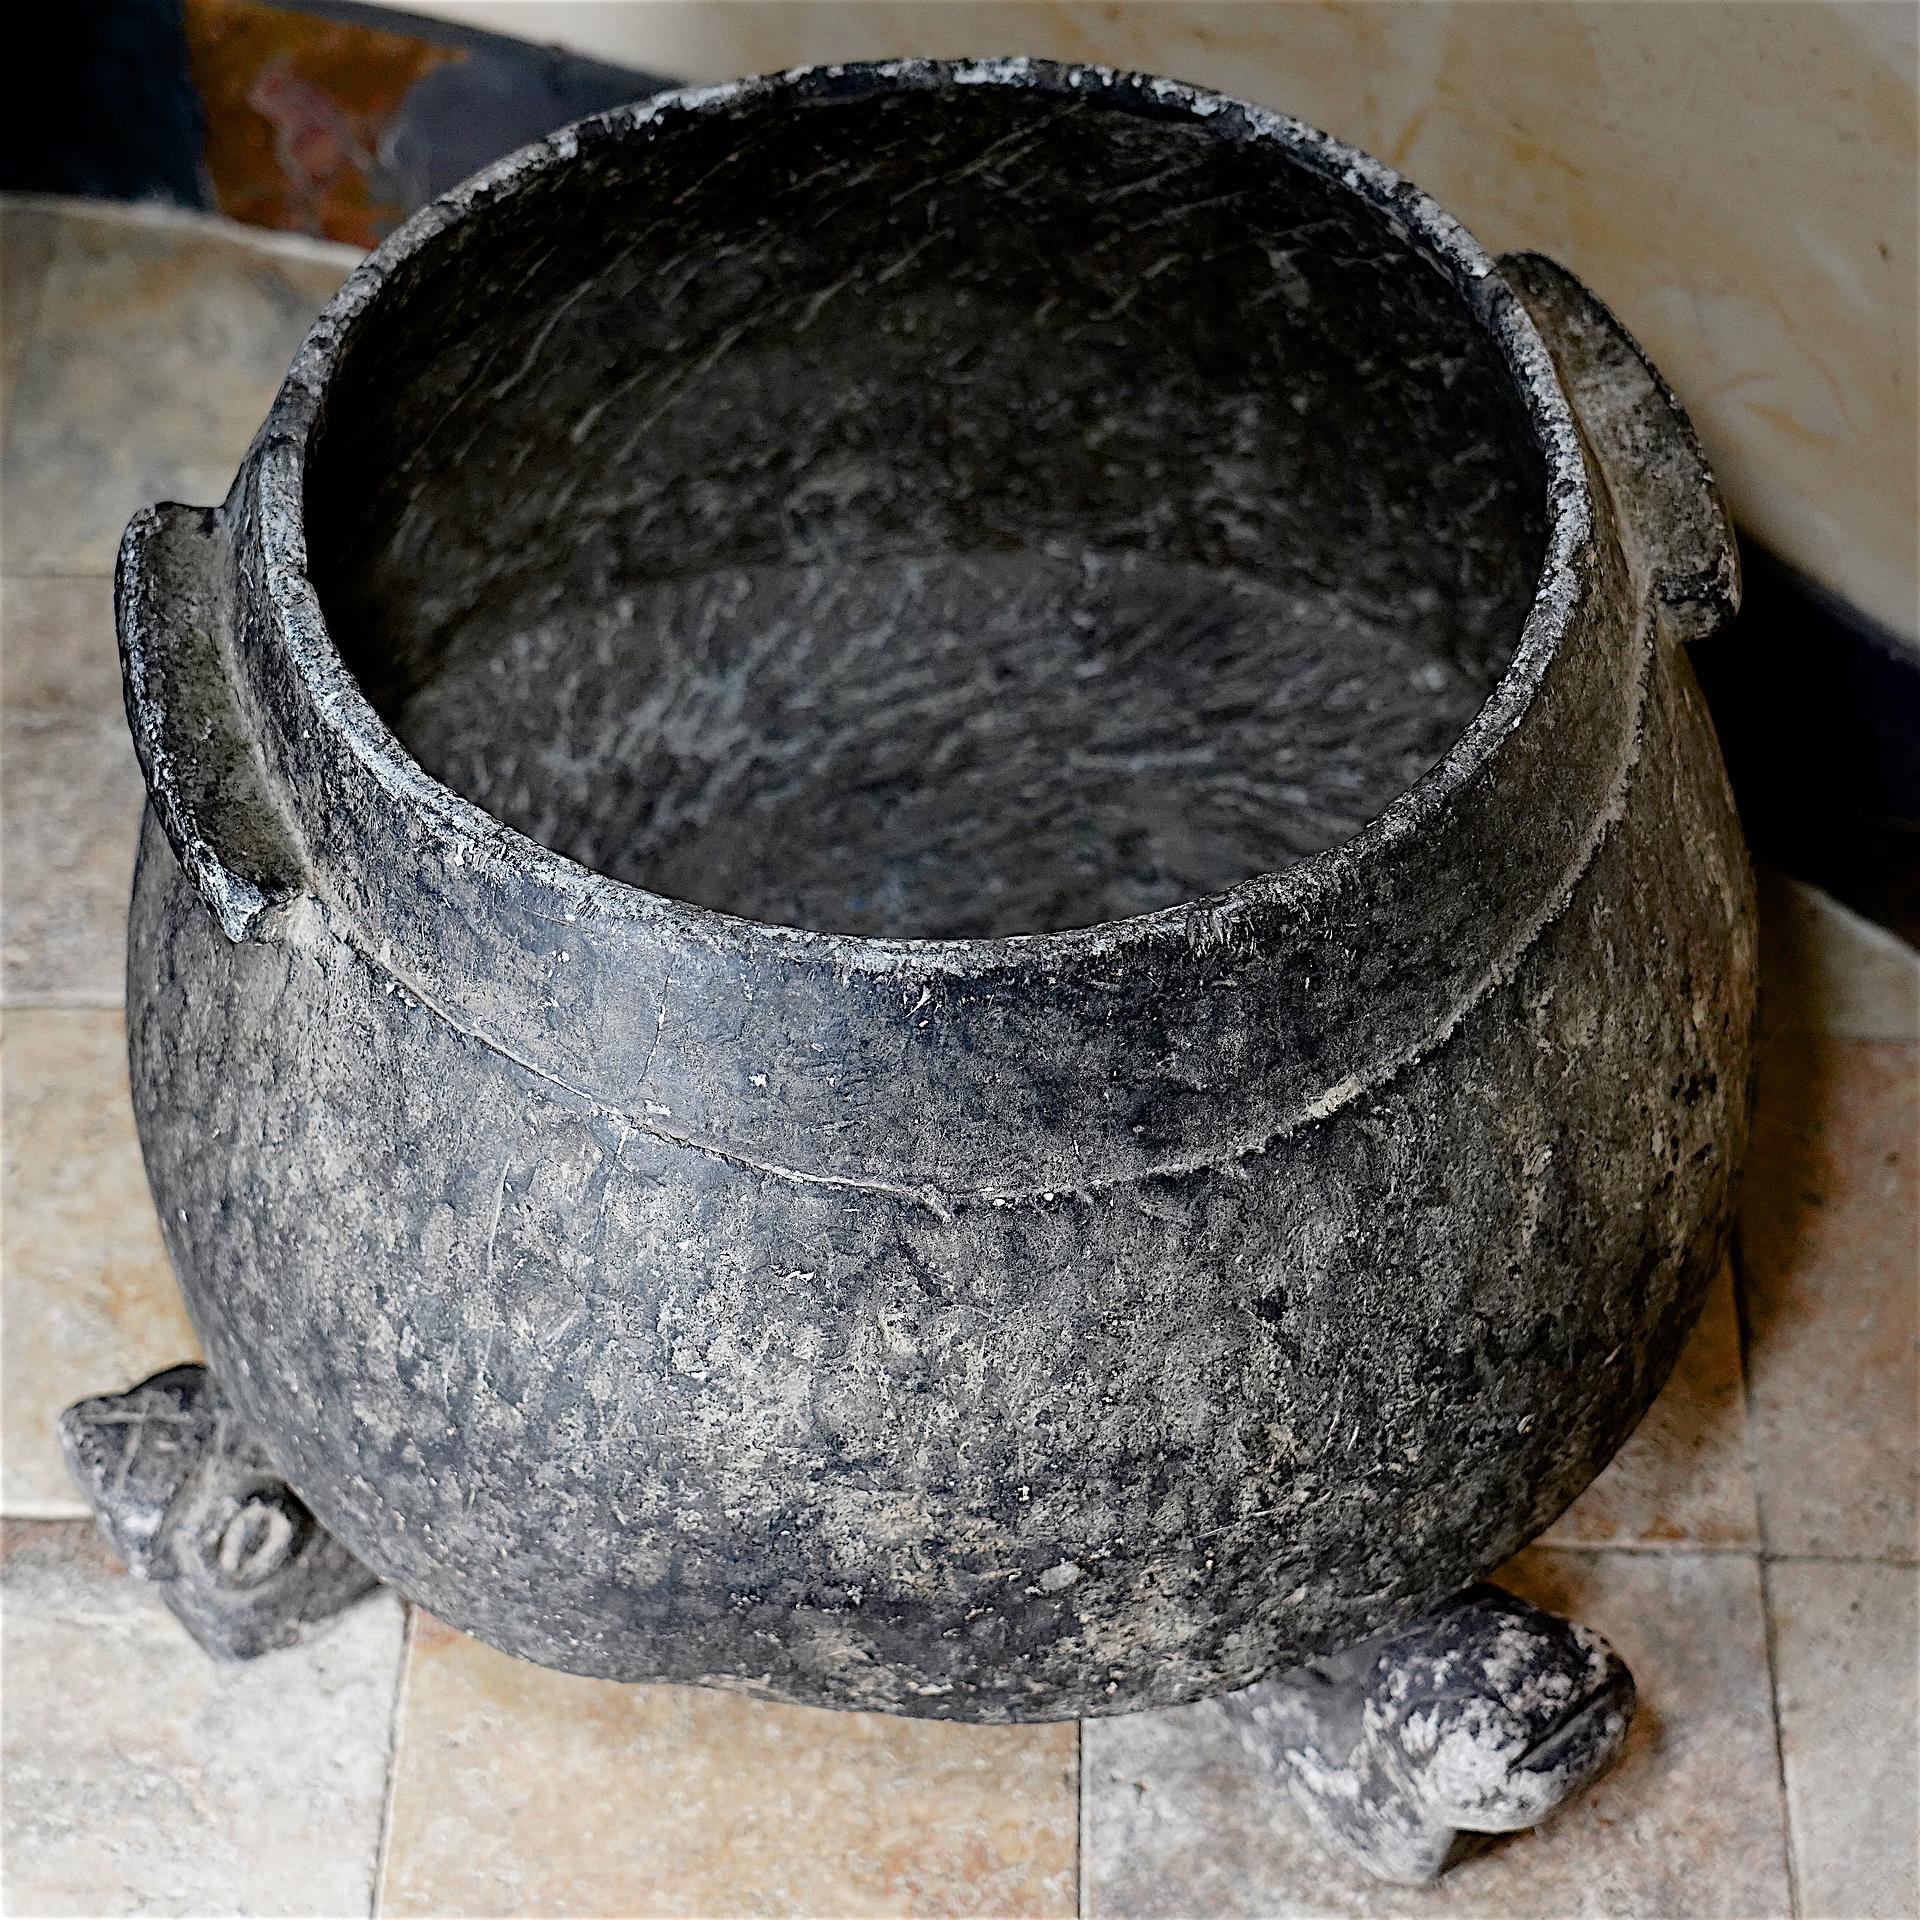 Stone cooking-pot from Afghanistan (14.04.2034) - Ethnic Design -  Collection Reto Zehnder